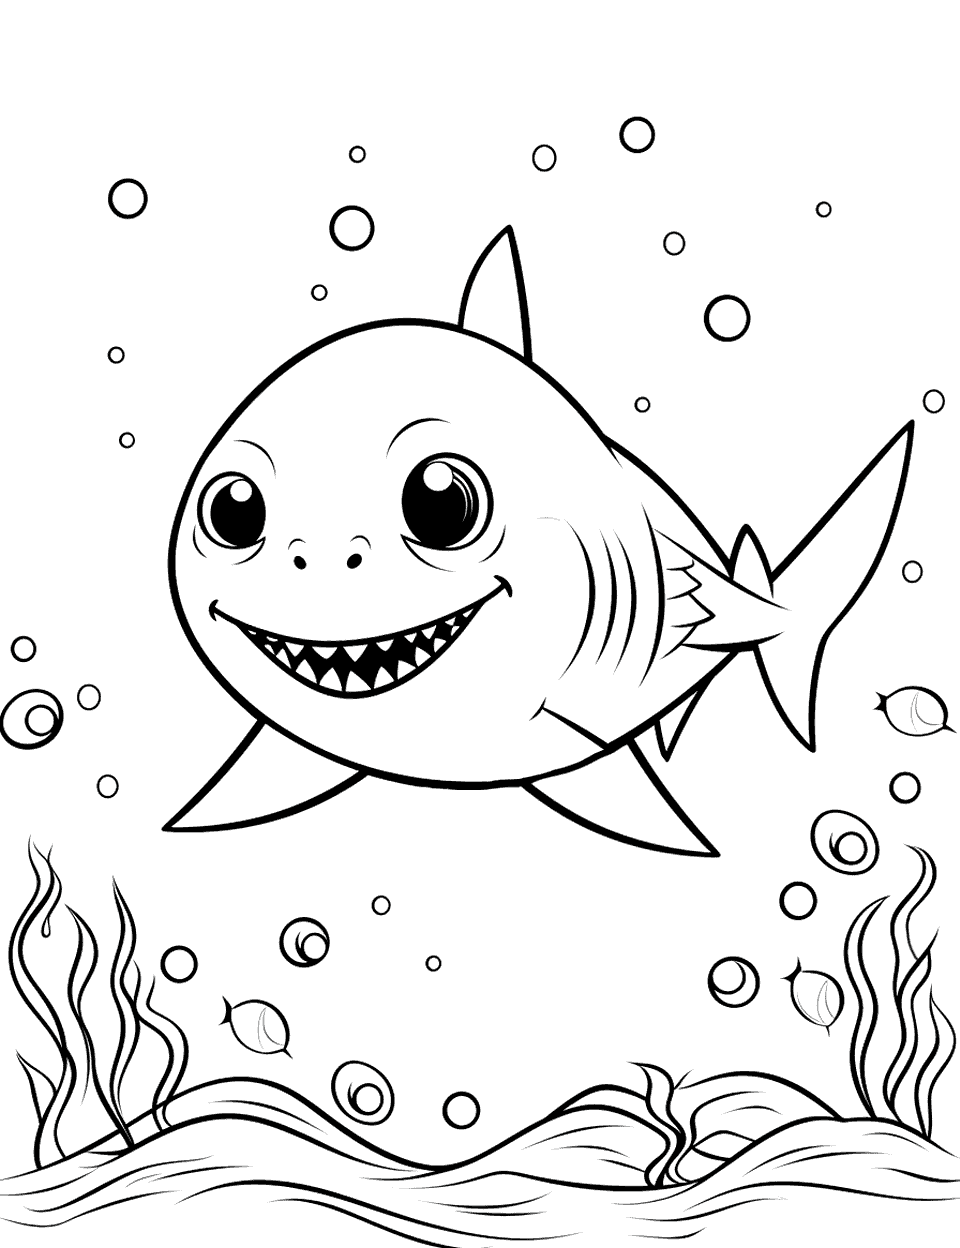 William the Baby Shark Coloring Page - A Baby Shark named William out to discover the wonders of the ocean.